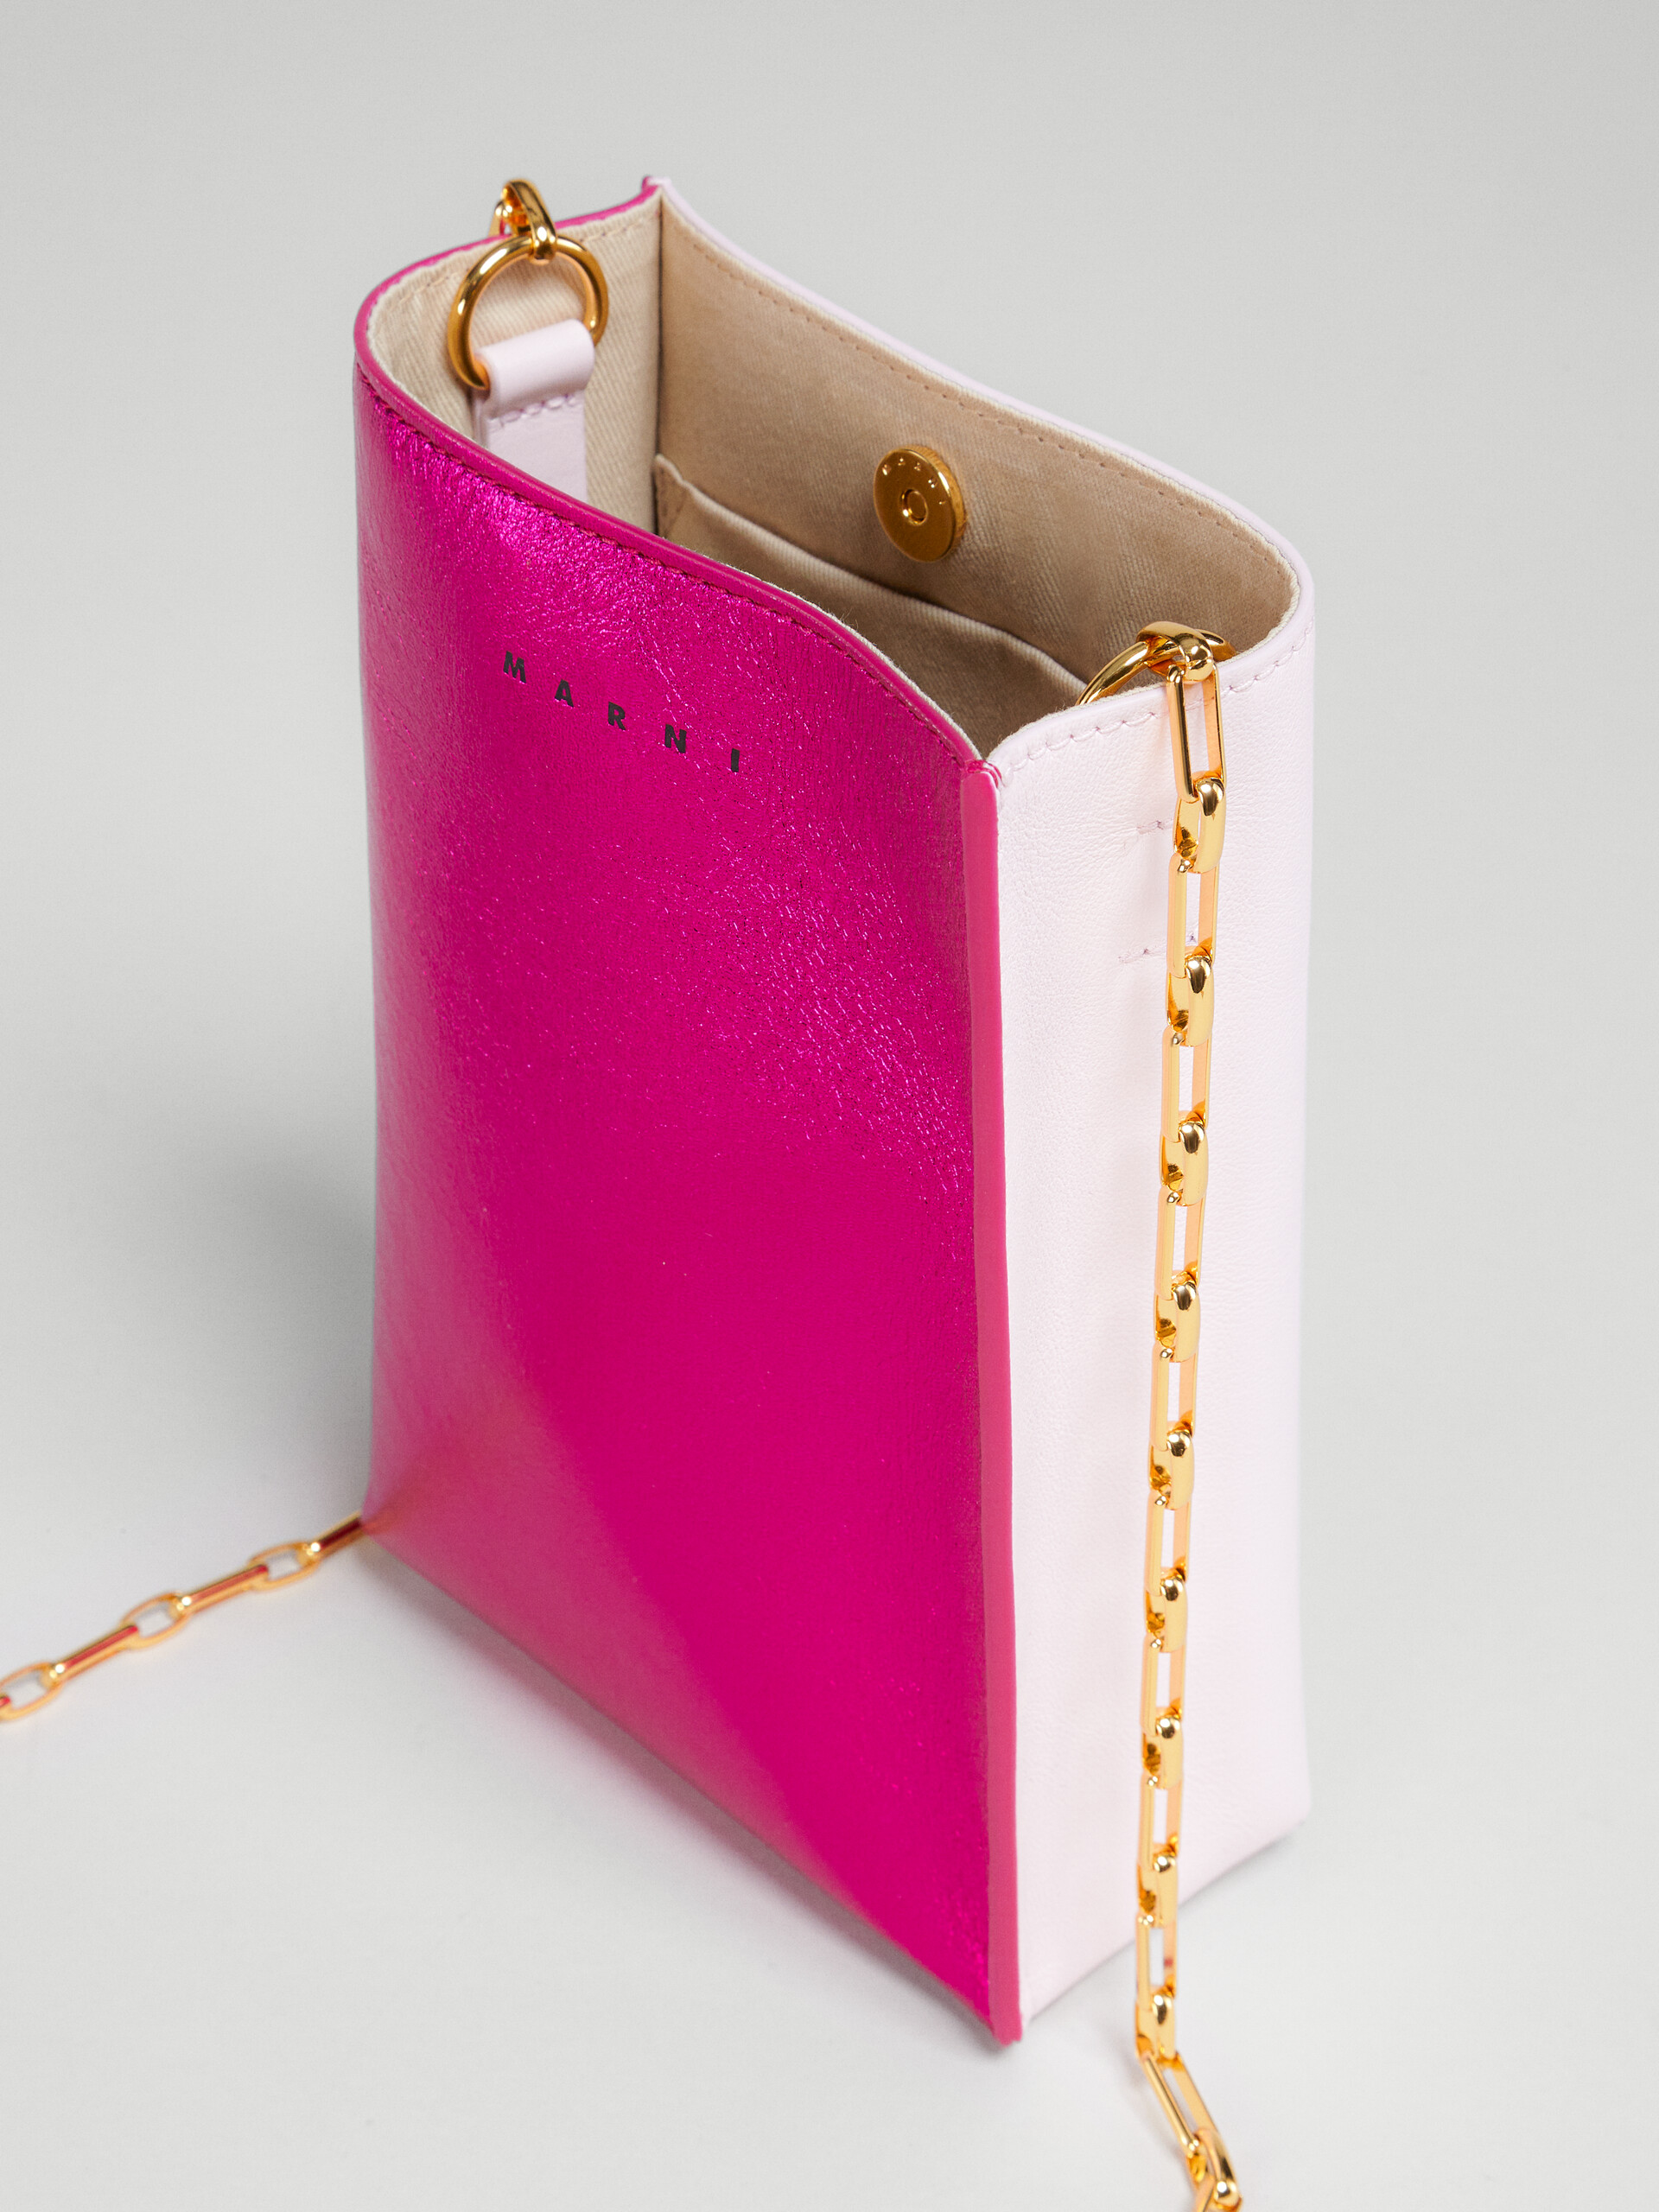 MUSEO SOFT nano bag in fuchsia and pink metallic leather - Shoulder Bags - Image 4